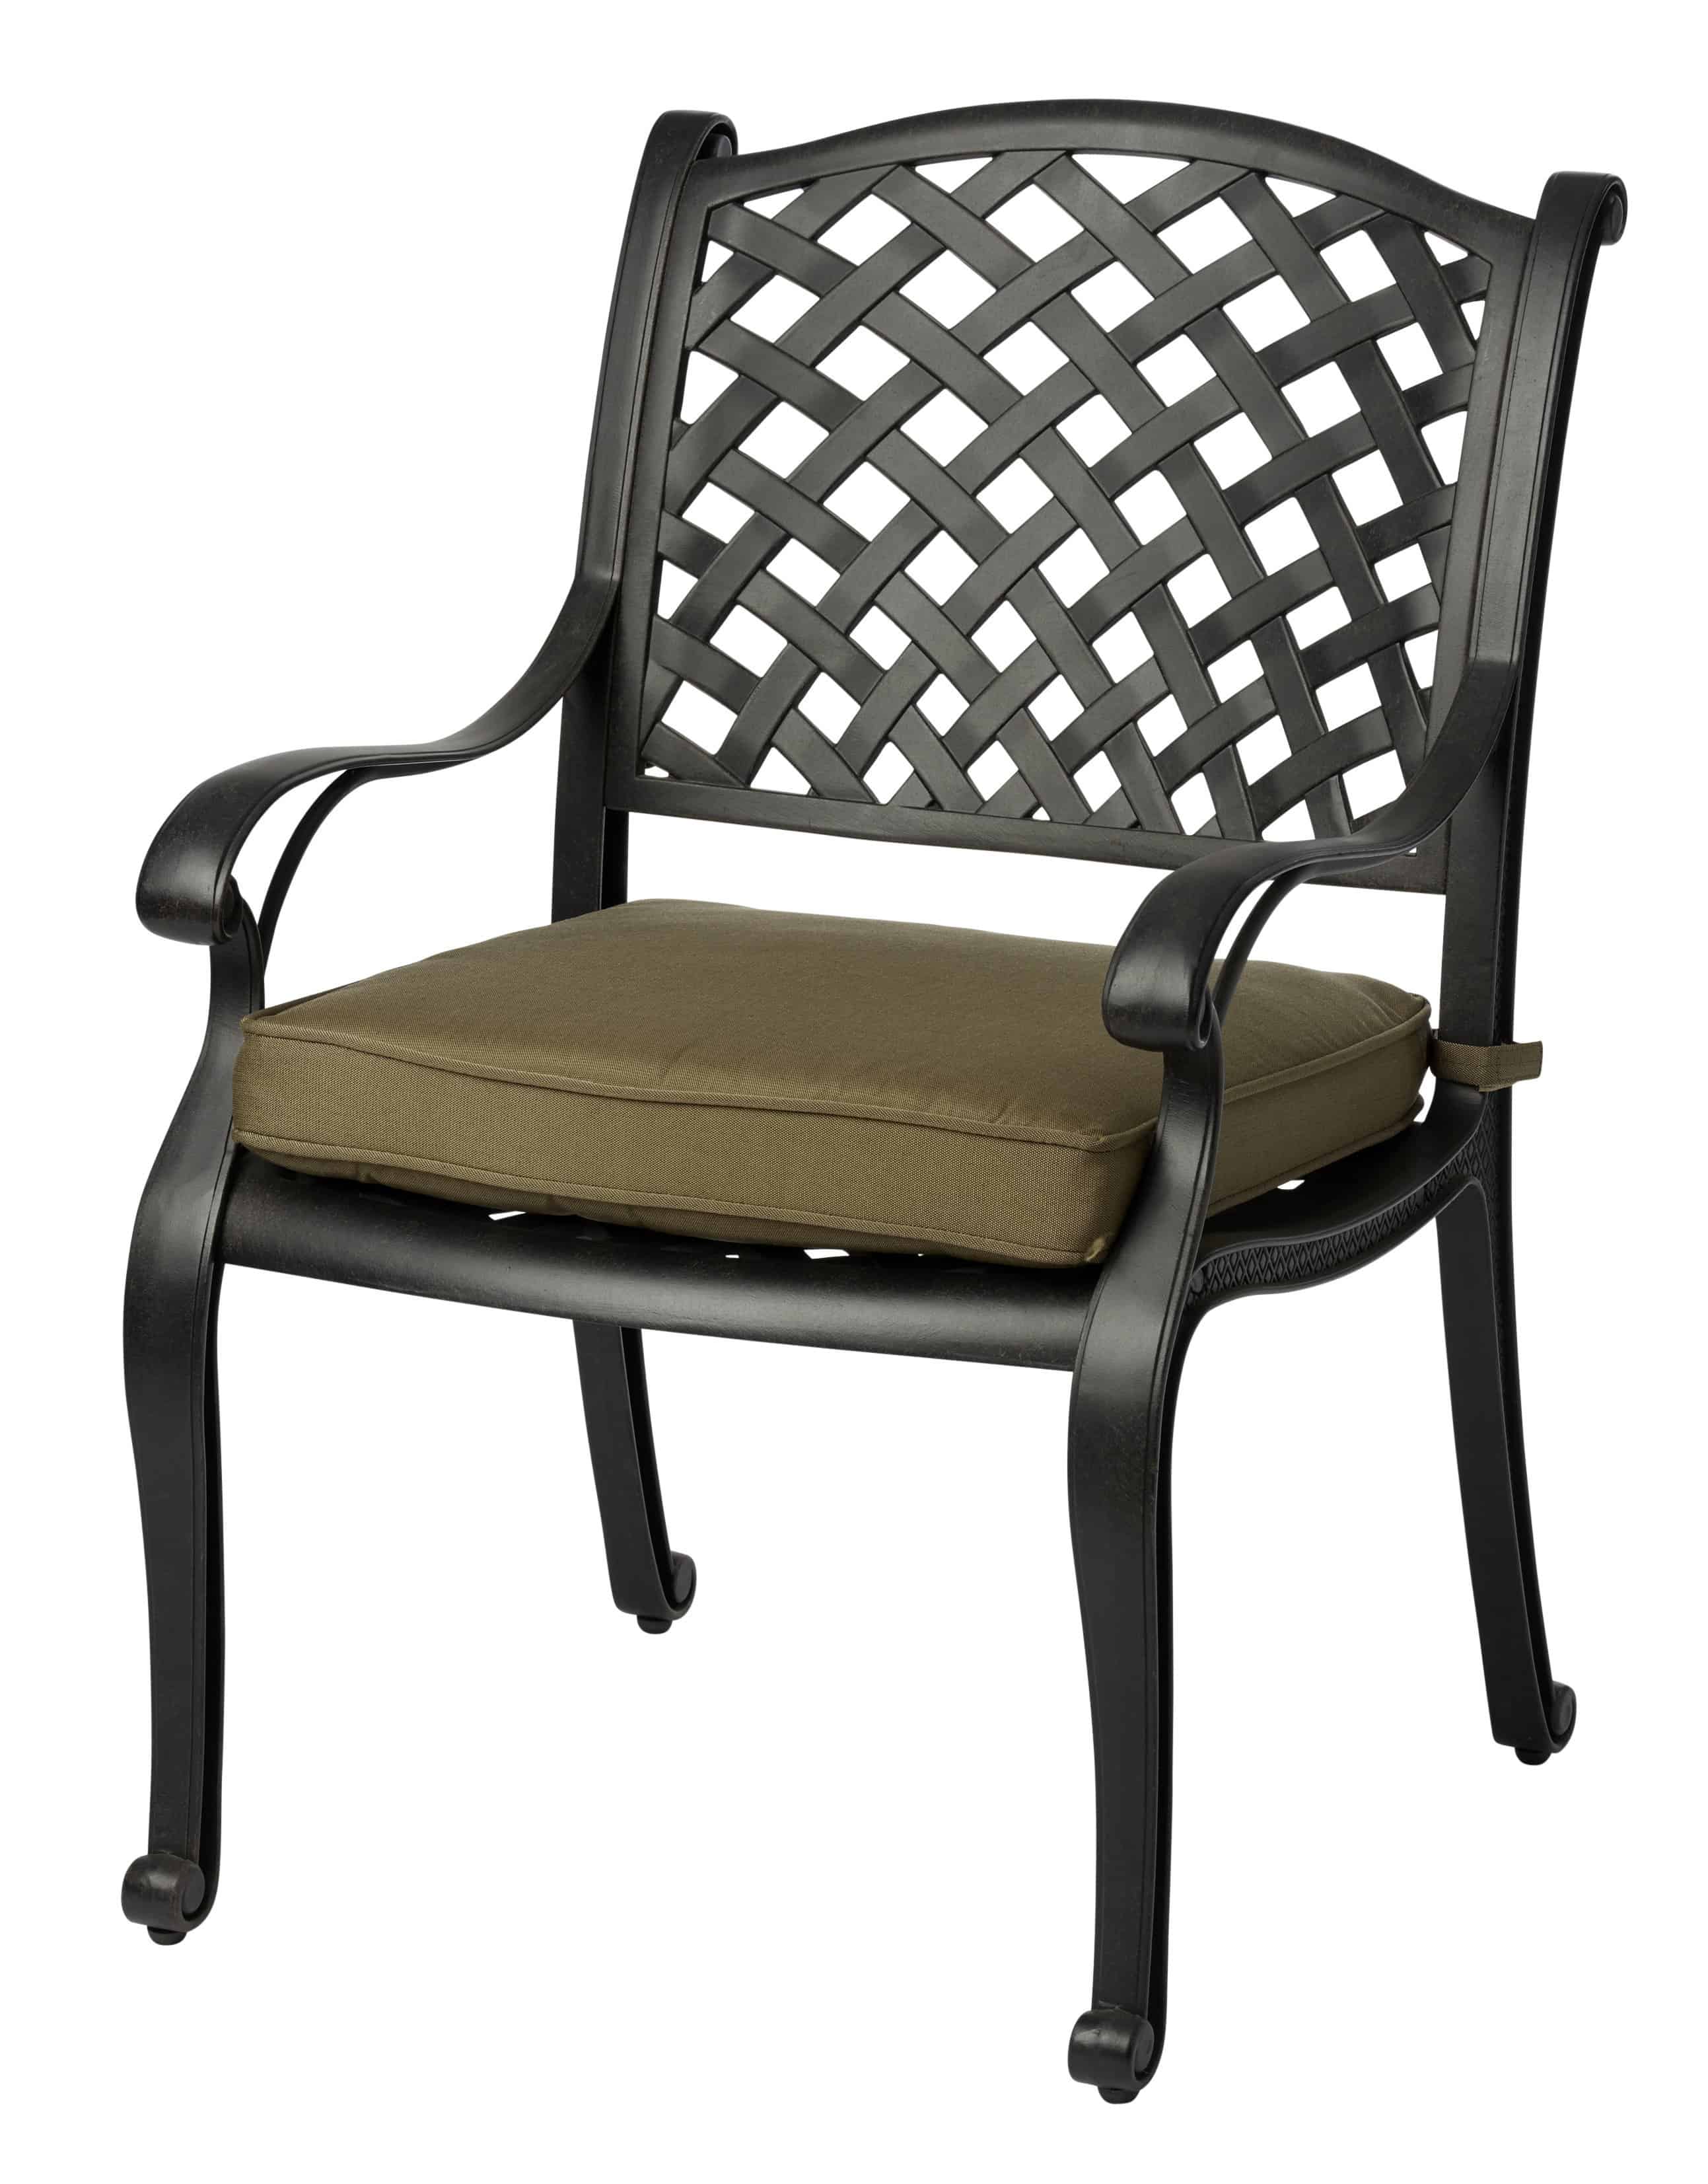 Melton Craft Nassau Chair with Cushion - Tucker Barbecues